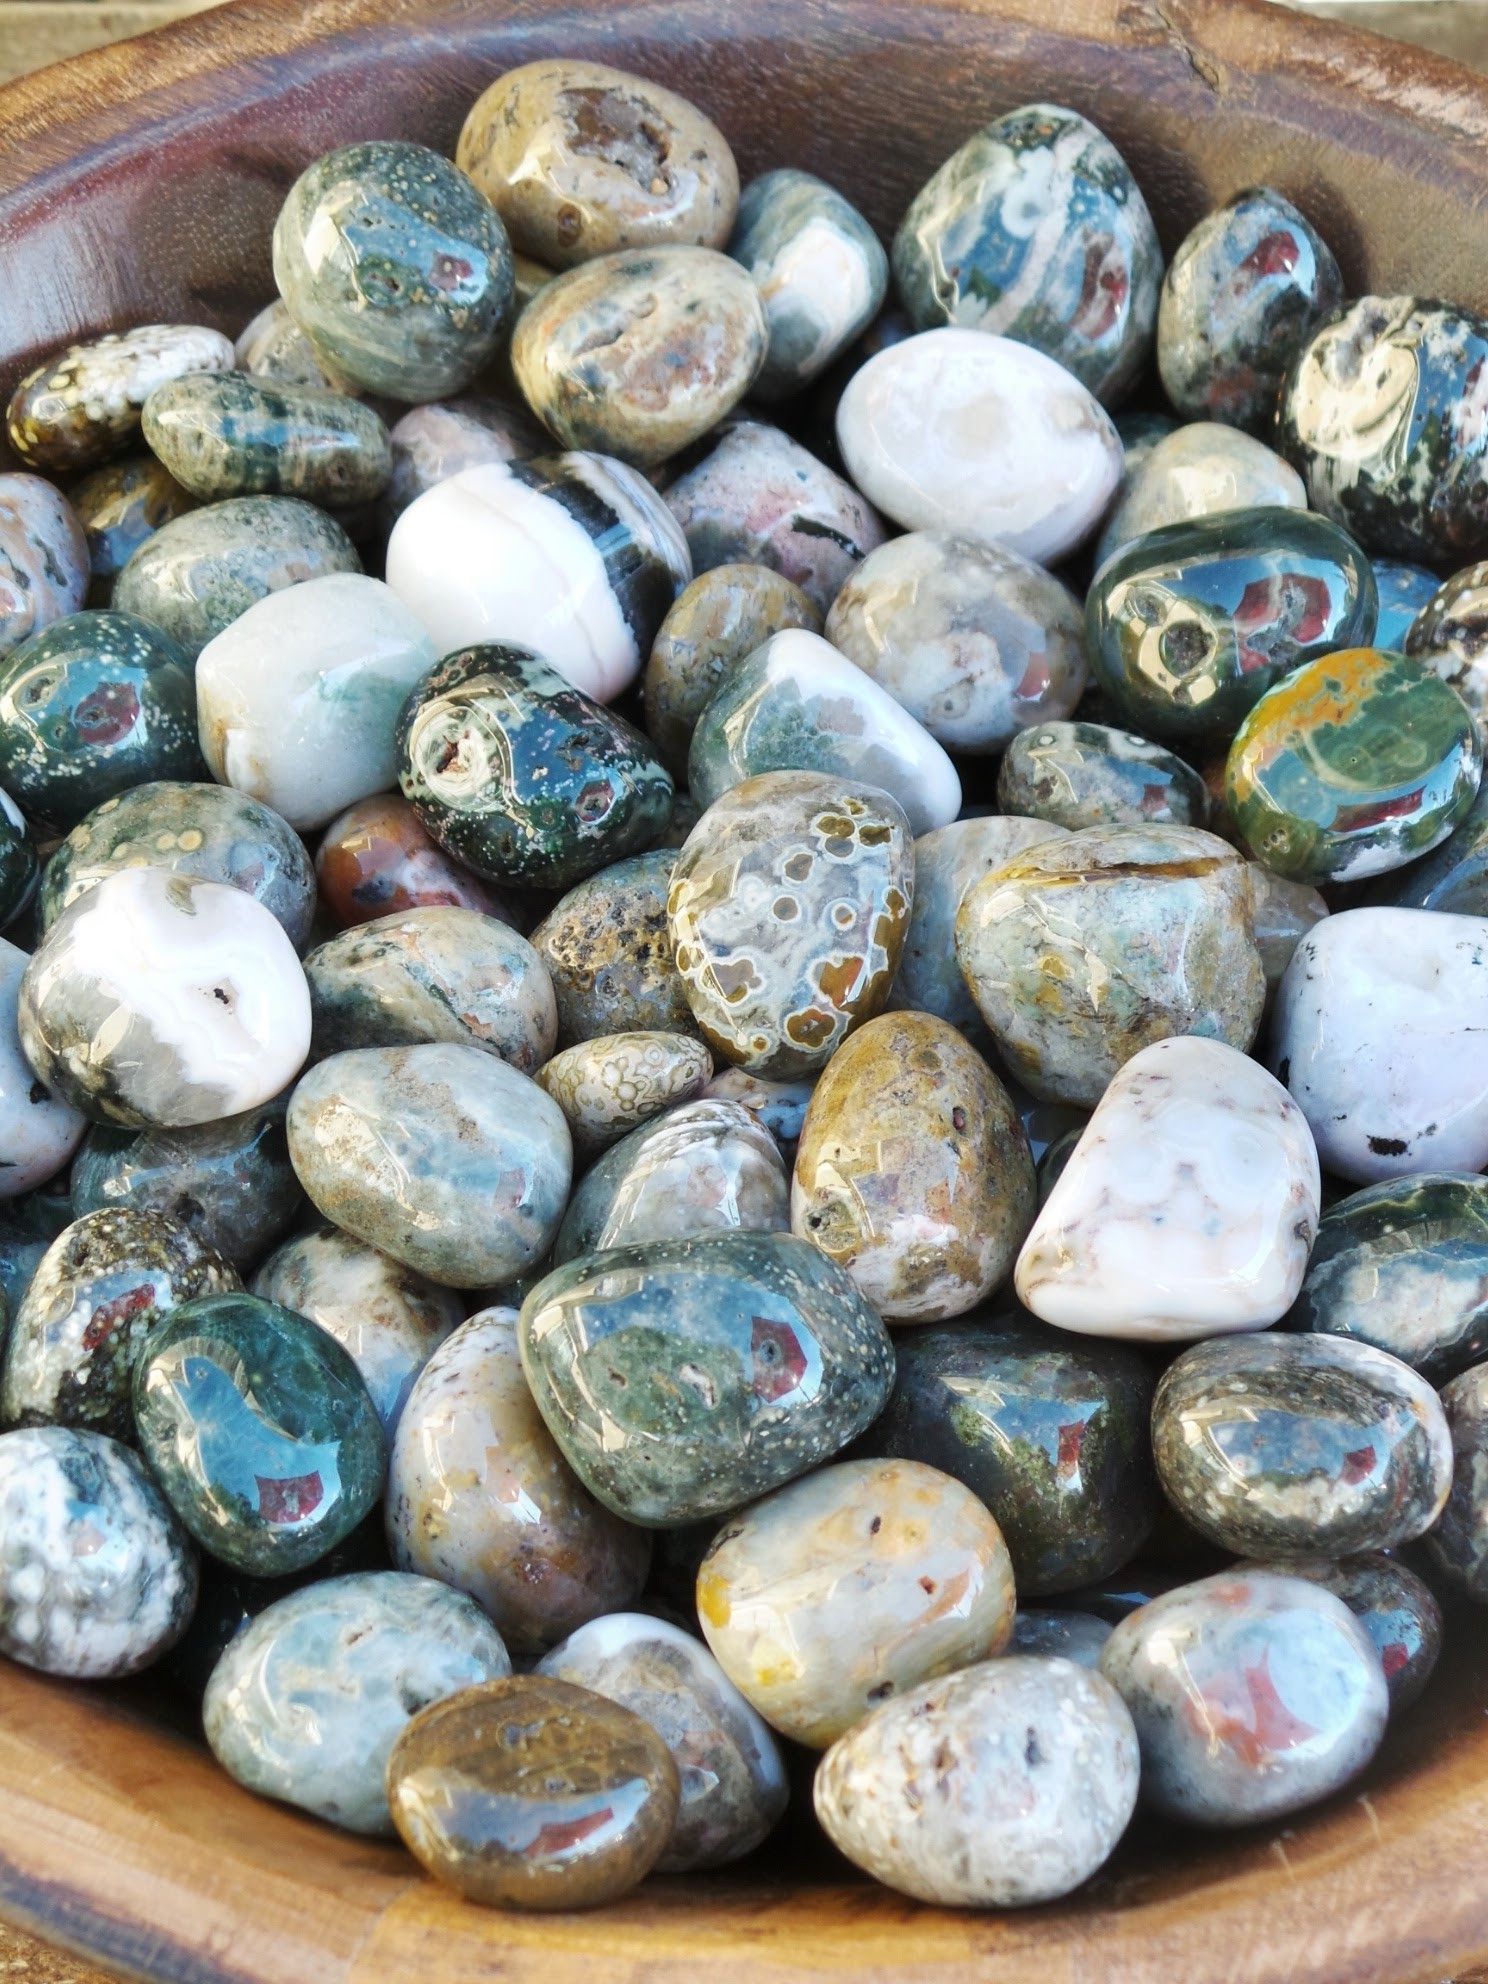 Moss Agate - Know Information About